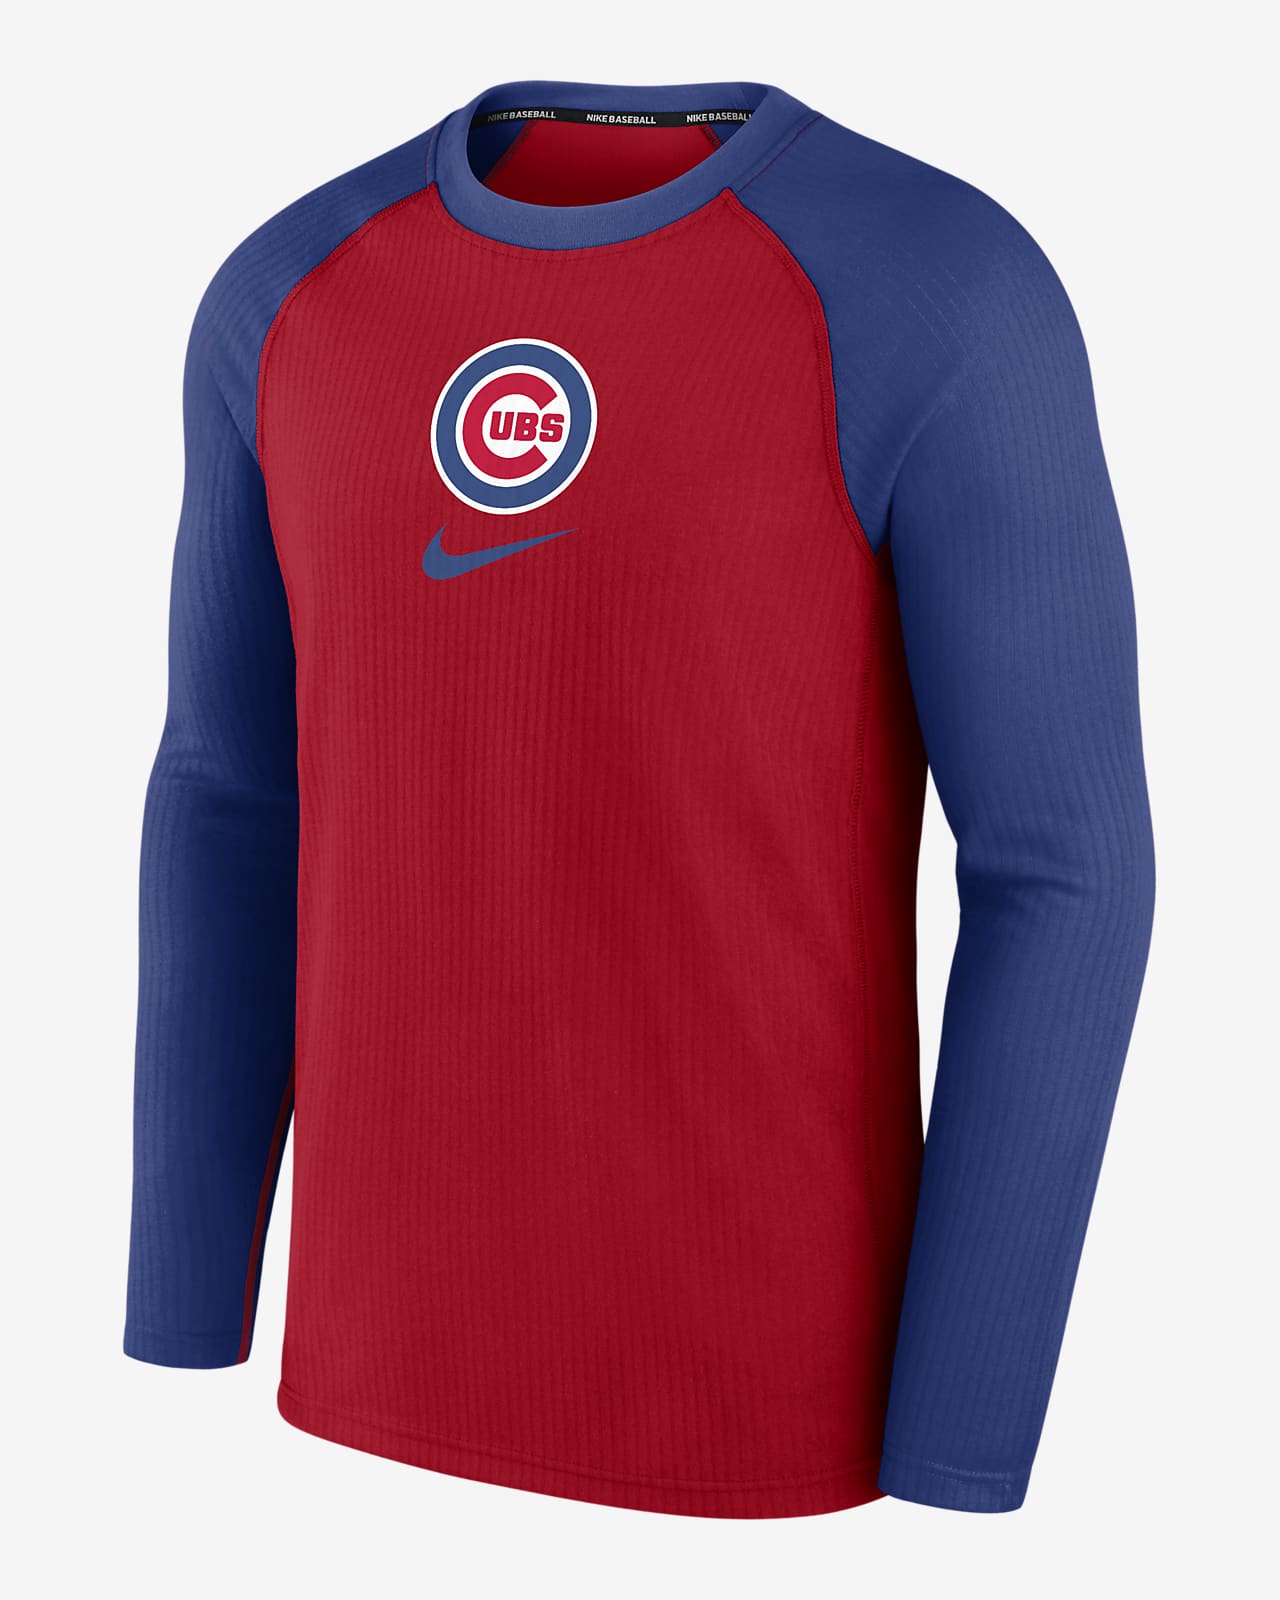 cubs red jersey